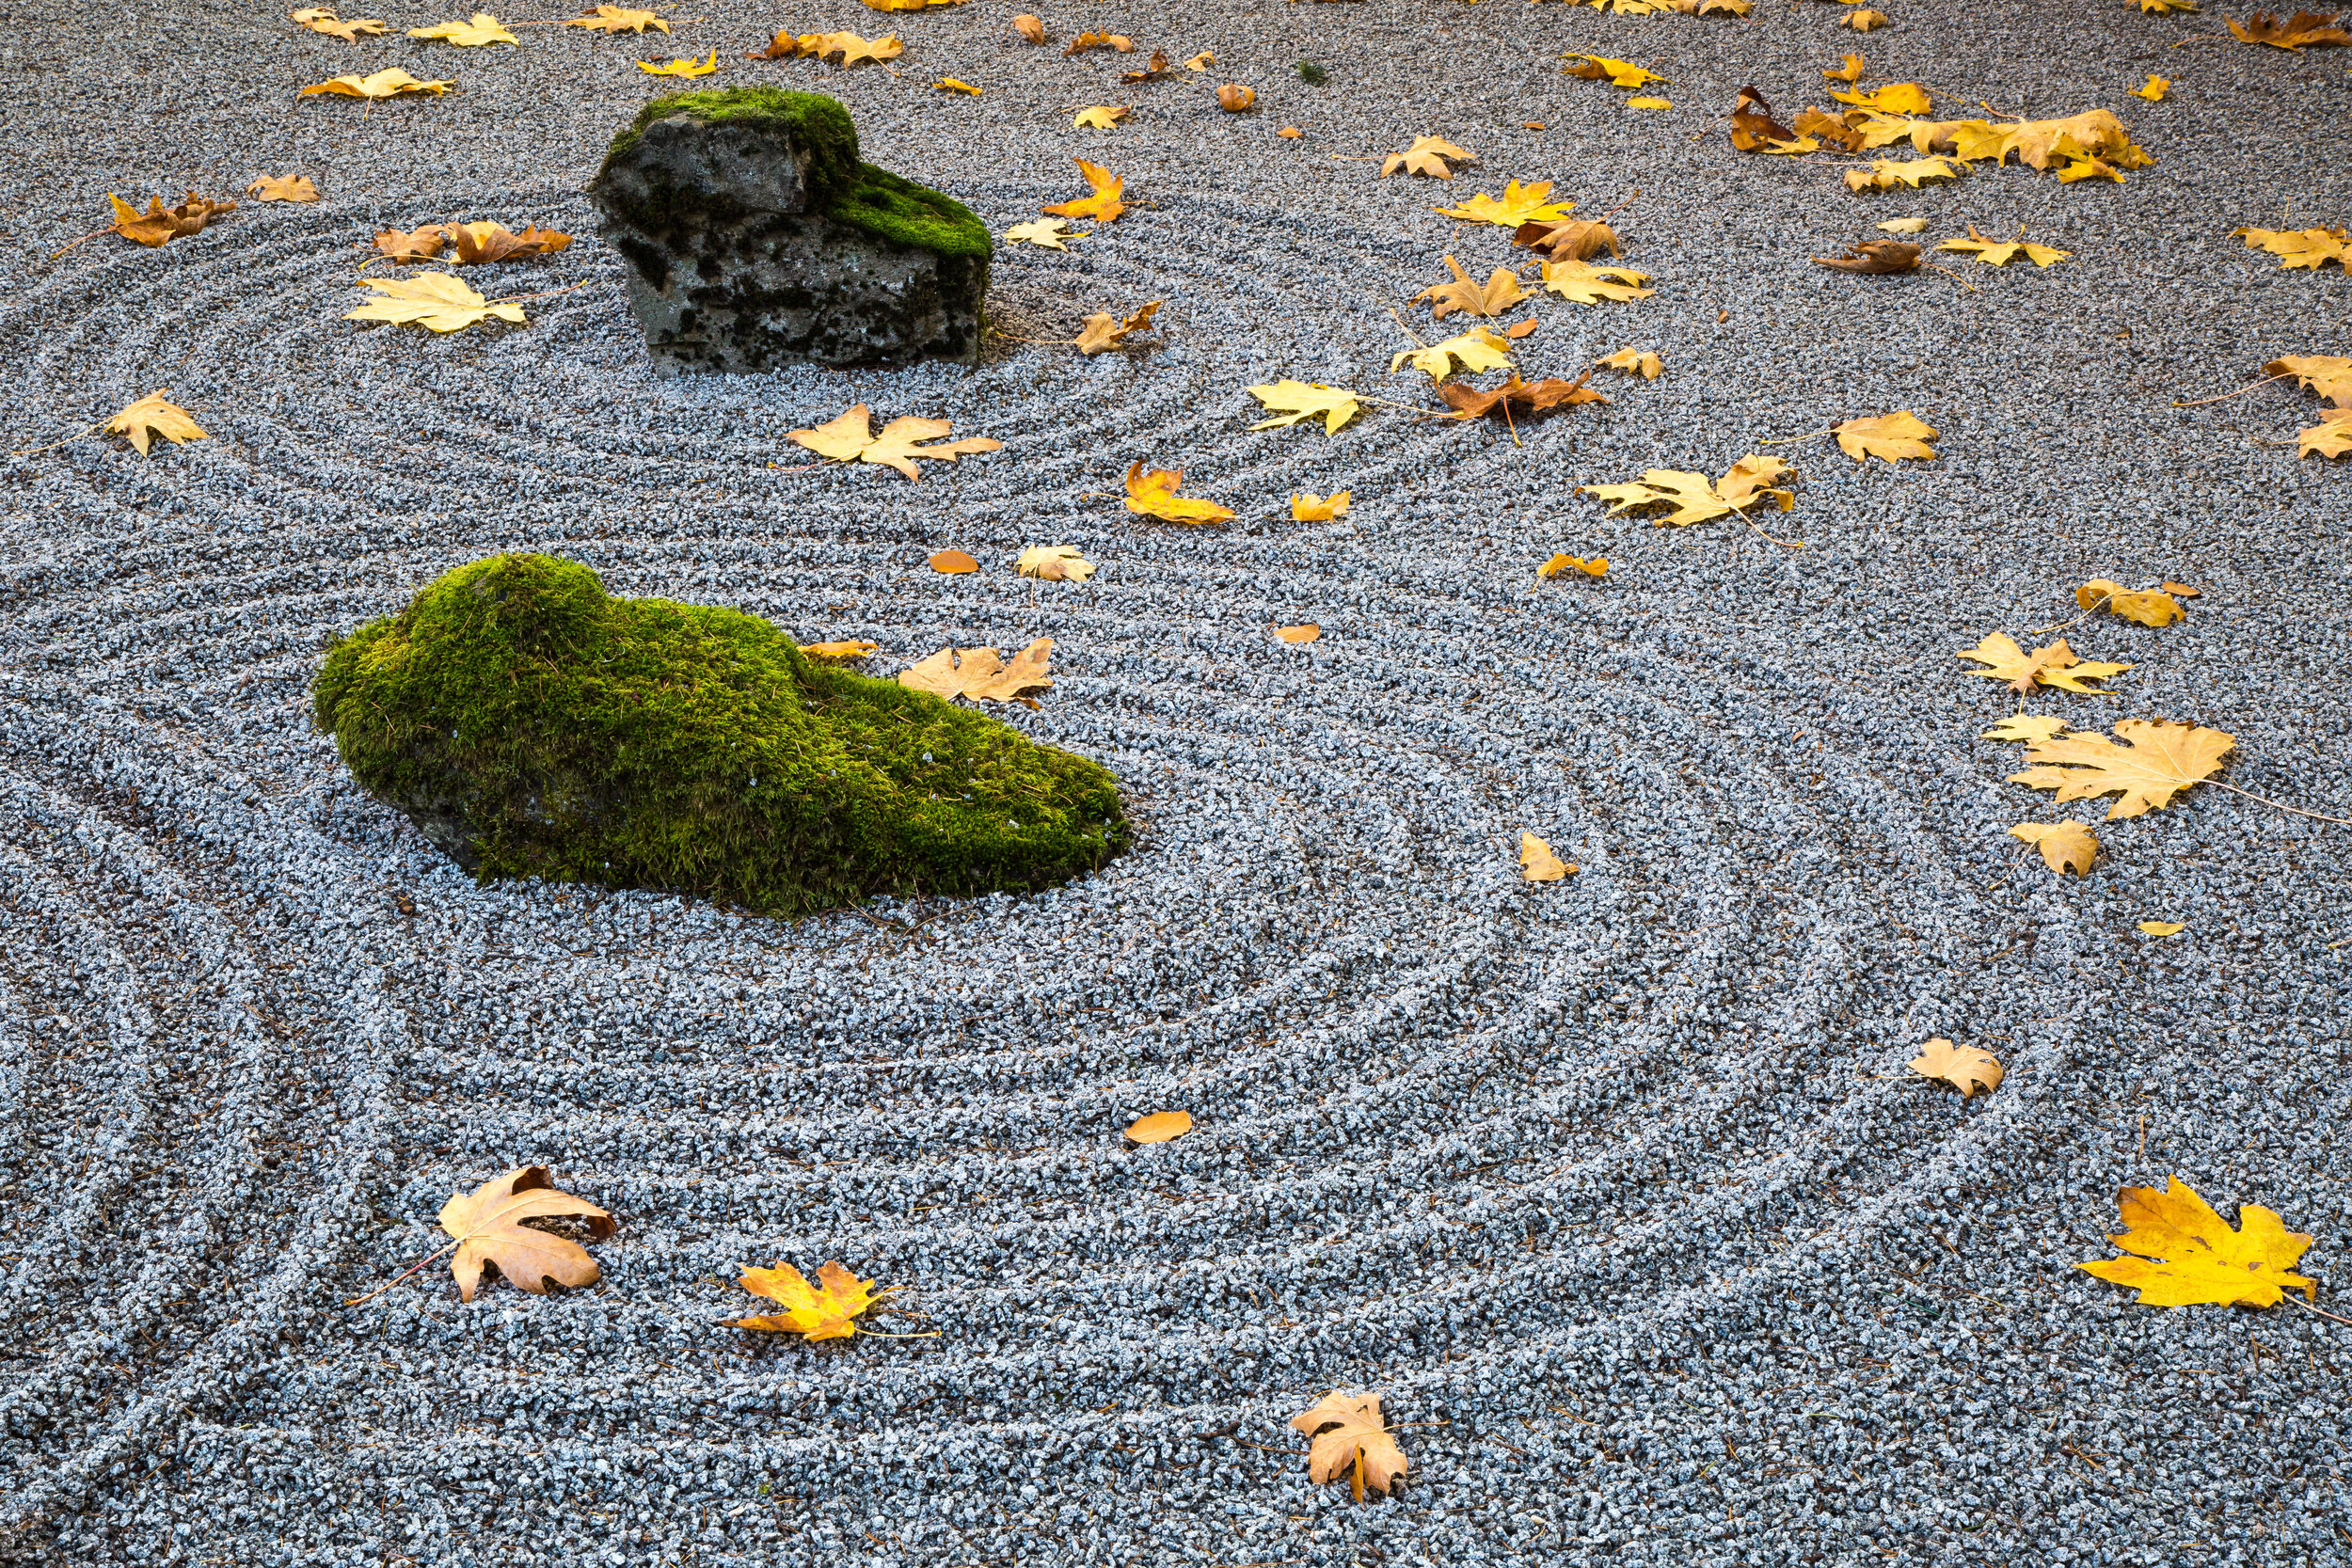 Sand and Stone, Japanese Garden, Fall